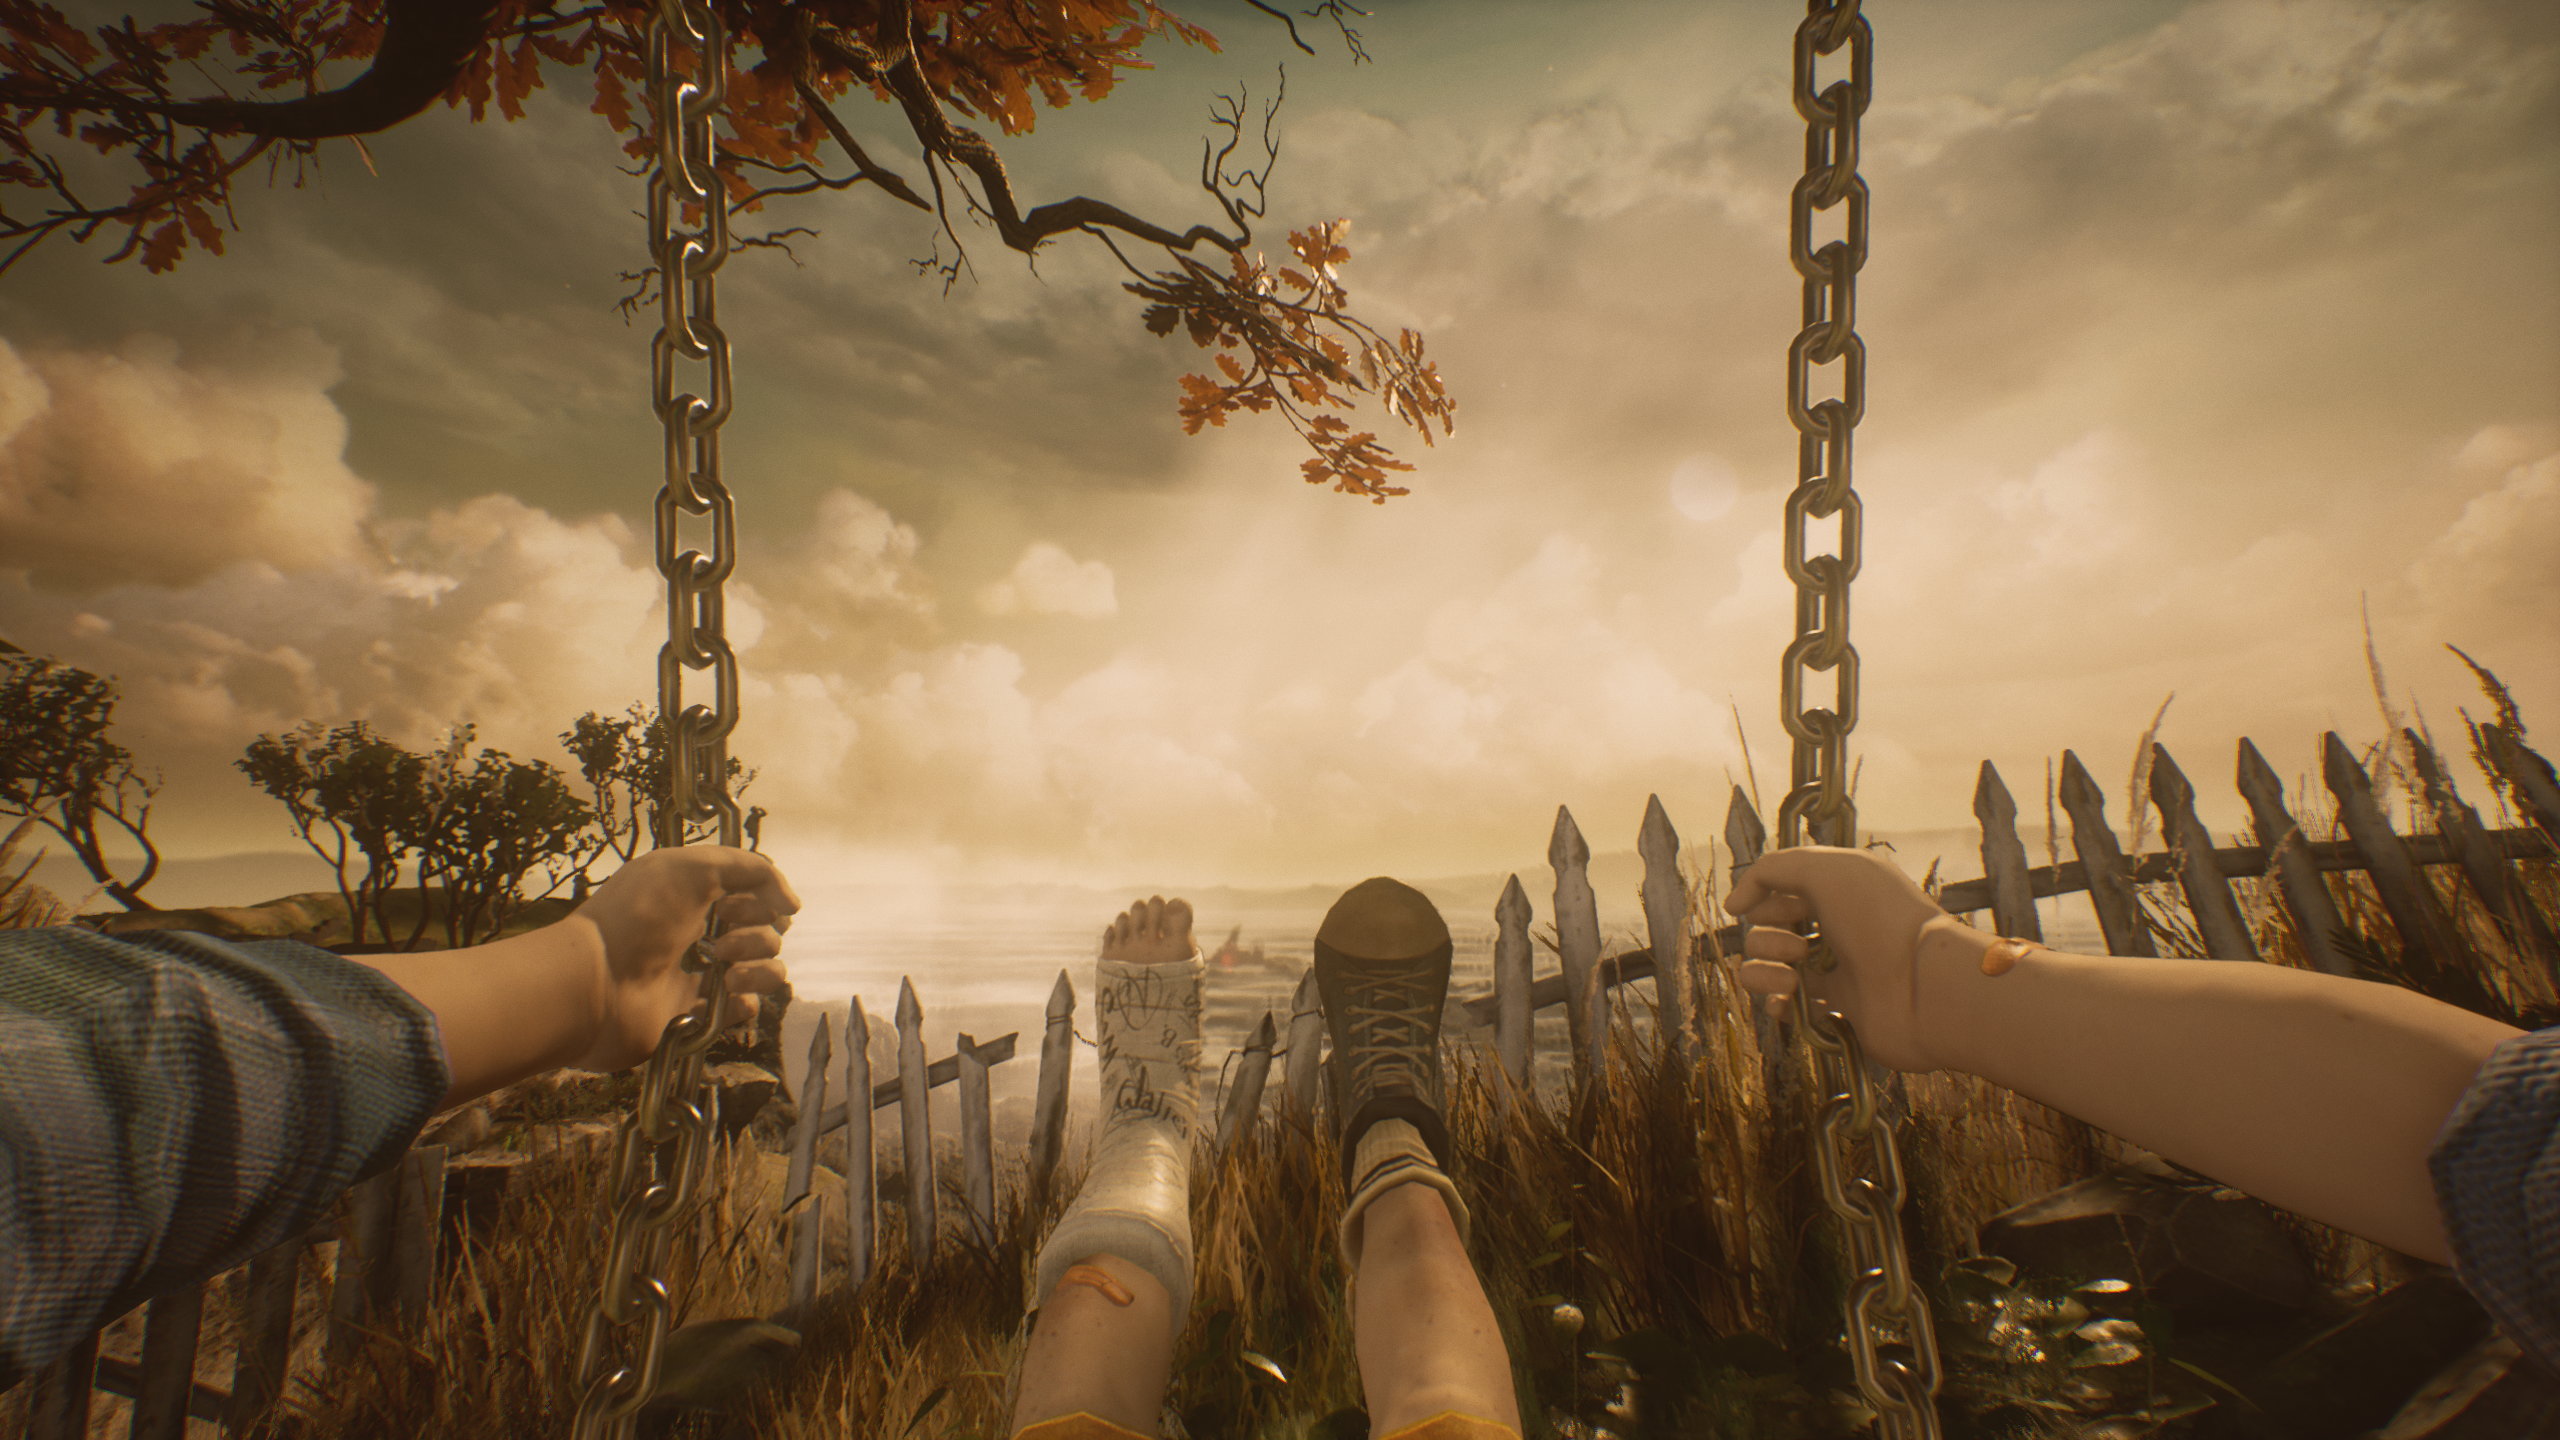 graphic adventure games - WHAT REMAINS OF EDITH FINCH